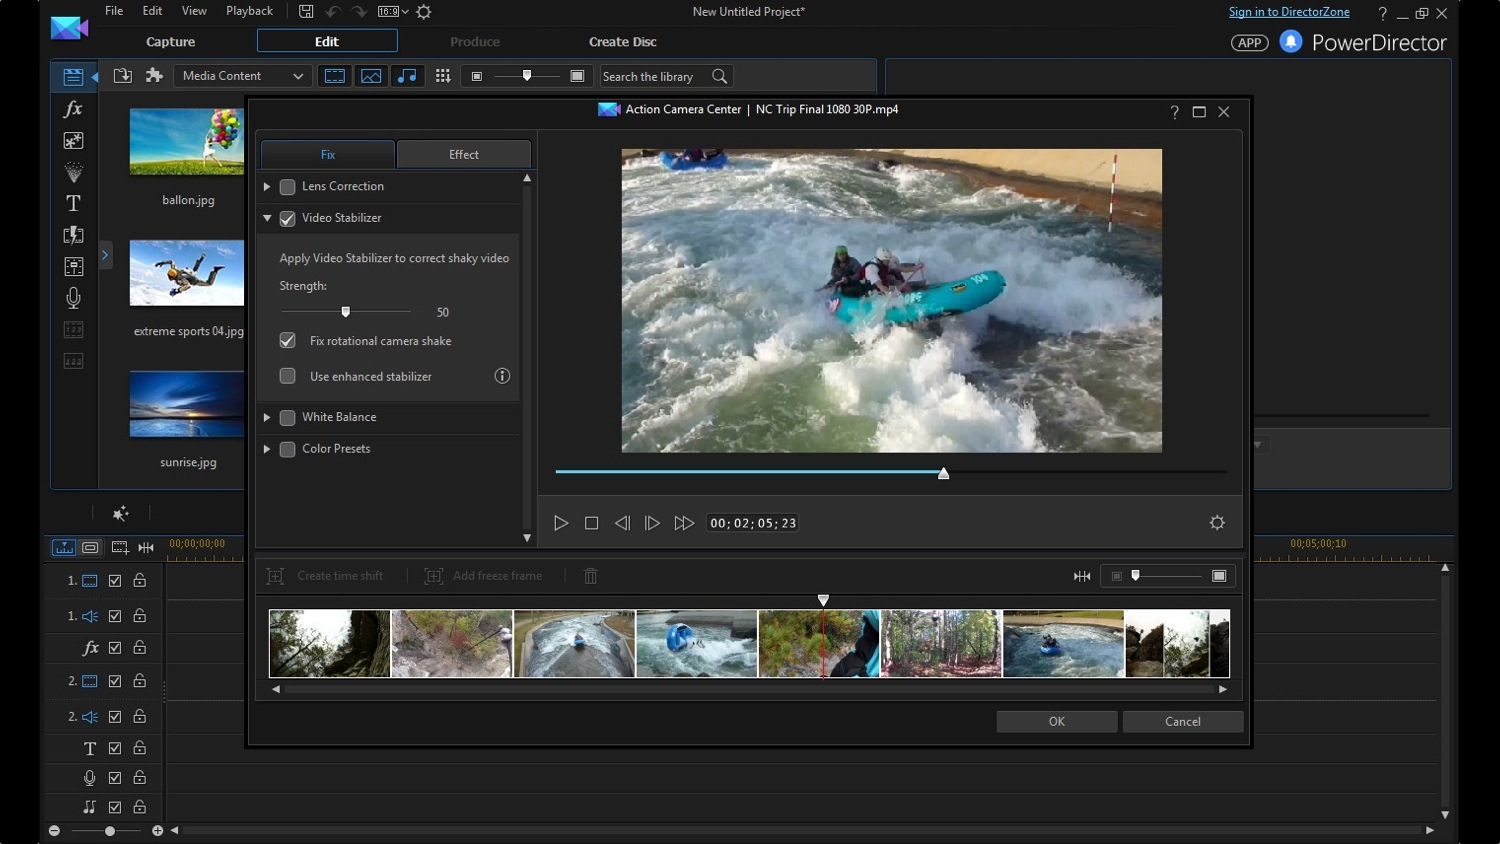 cyberlink director suite 4s new features include action cam video editing camera center enu